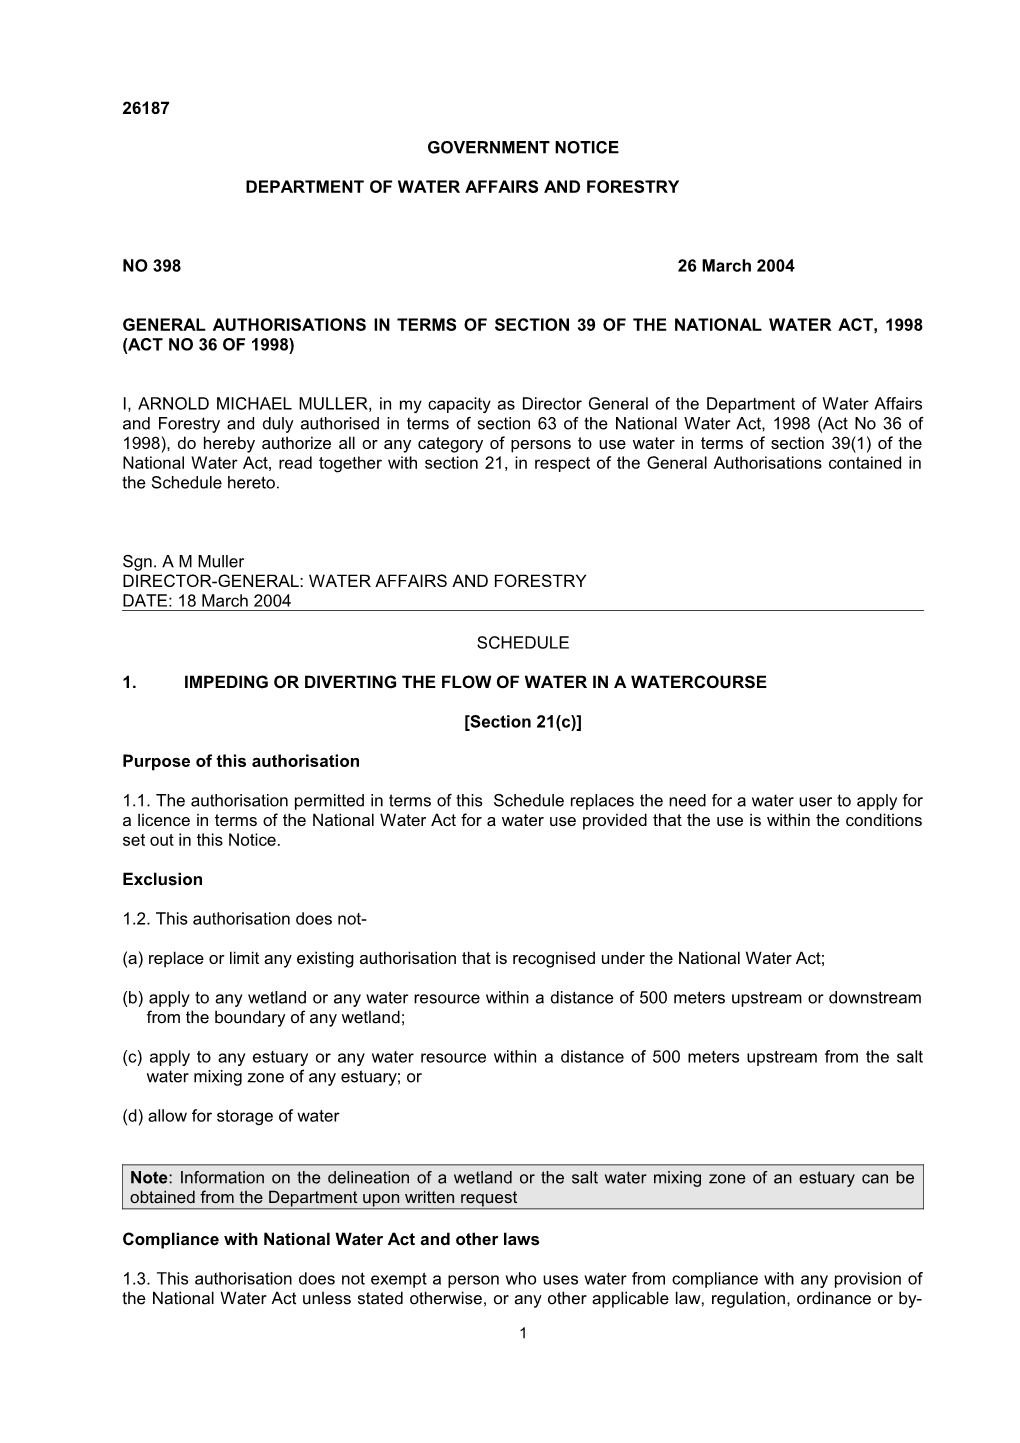 GENERAL AUTHORISATION in RESPECT of SECTION 21(C) of the NATIONAL WATER ACT (ACT 36 OF